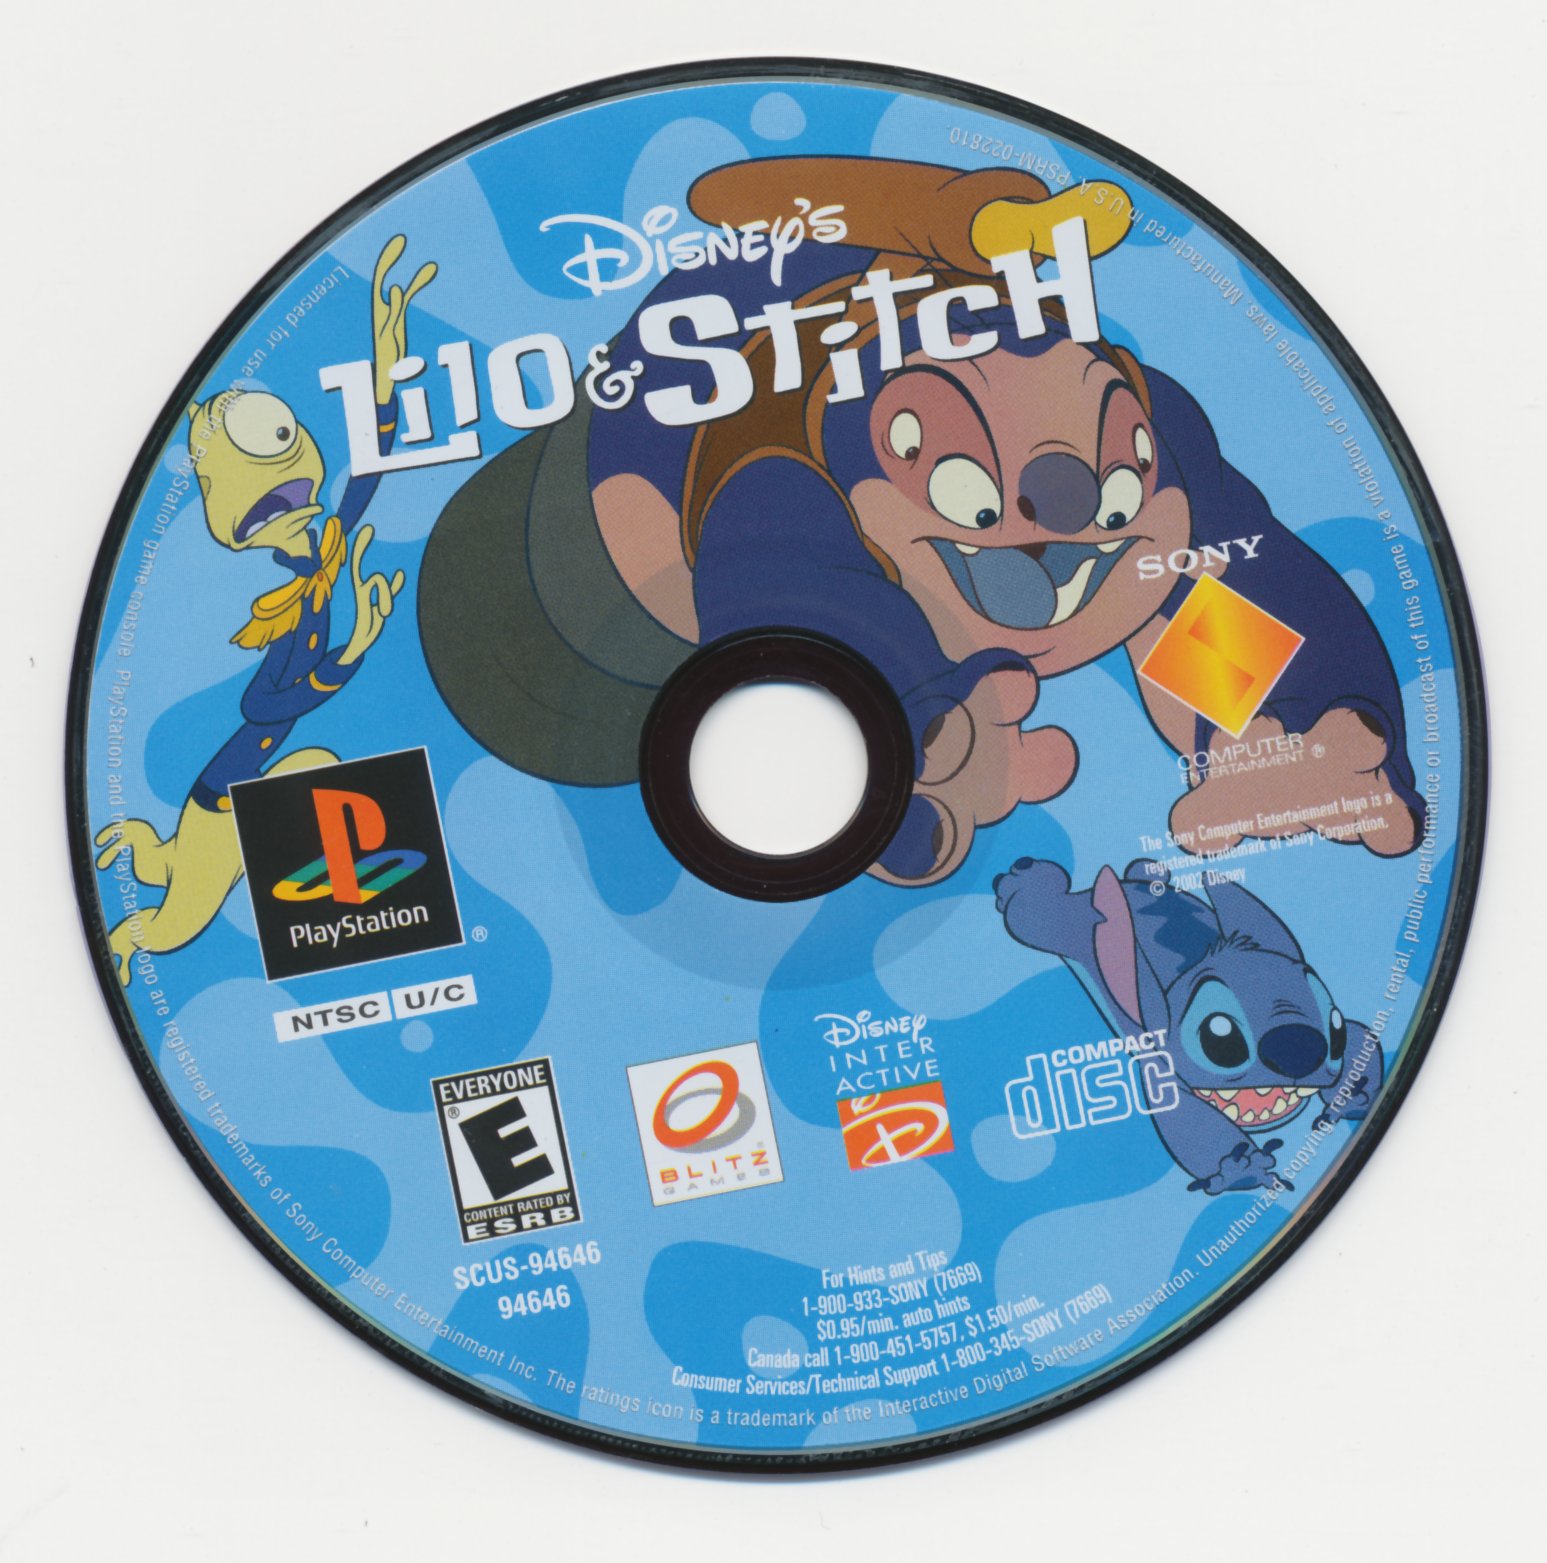 Disney's Lilo & Stitch: Trouble in Paradise (PlayStation) - The